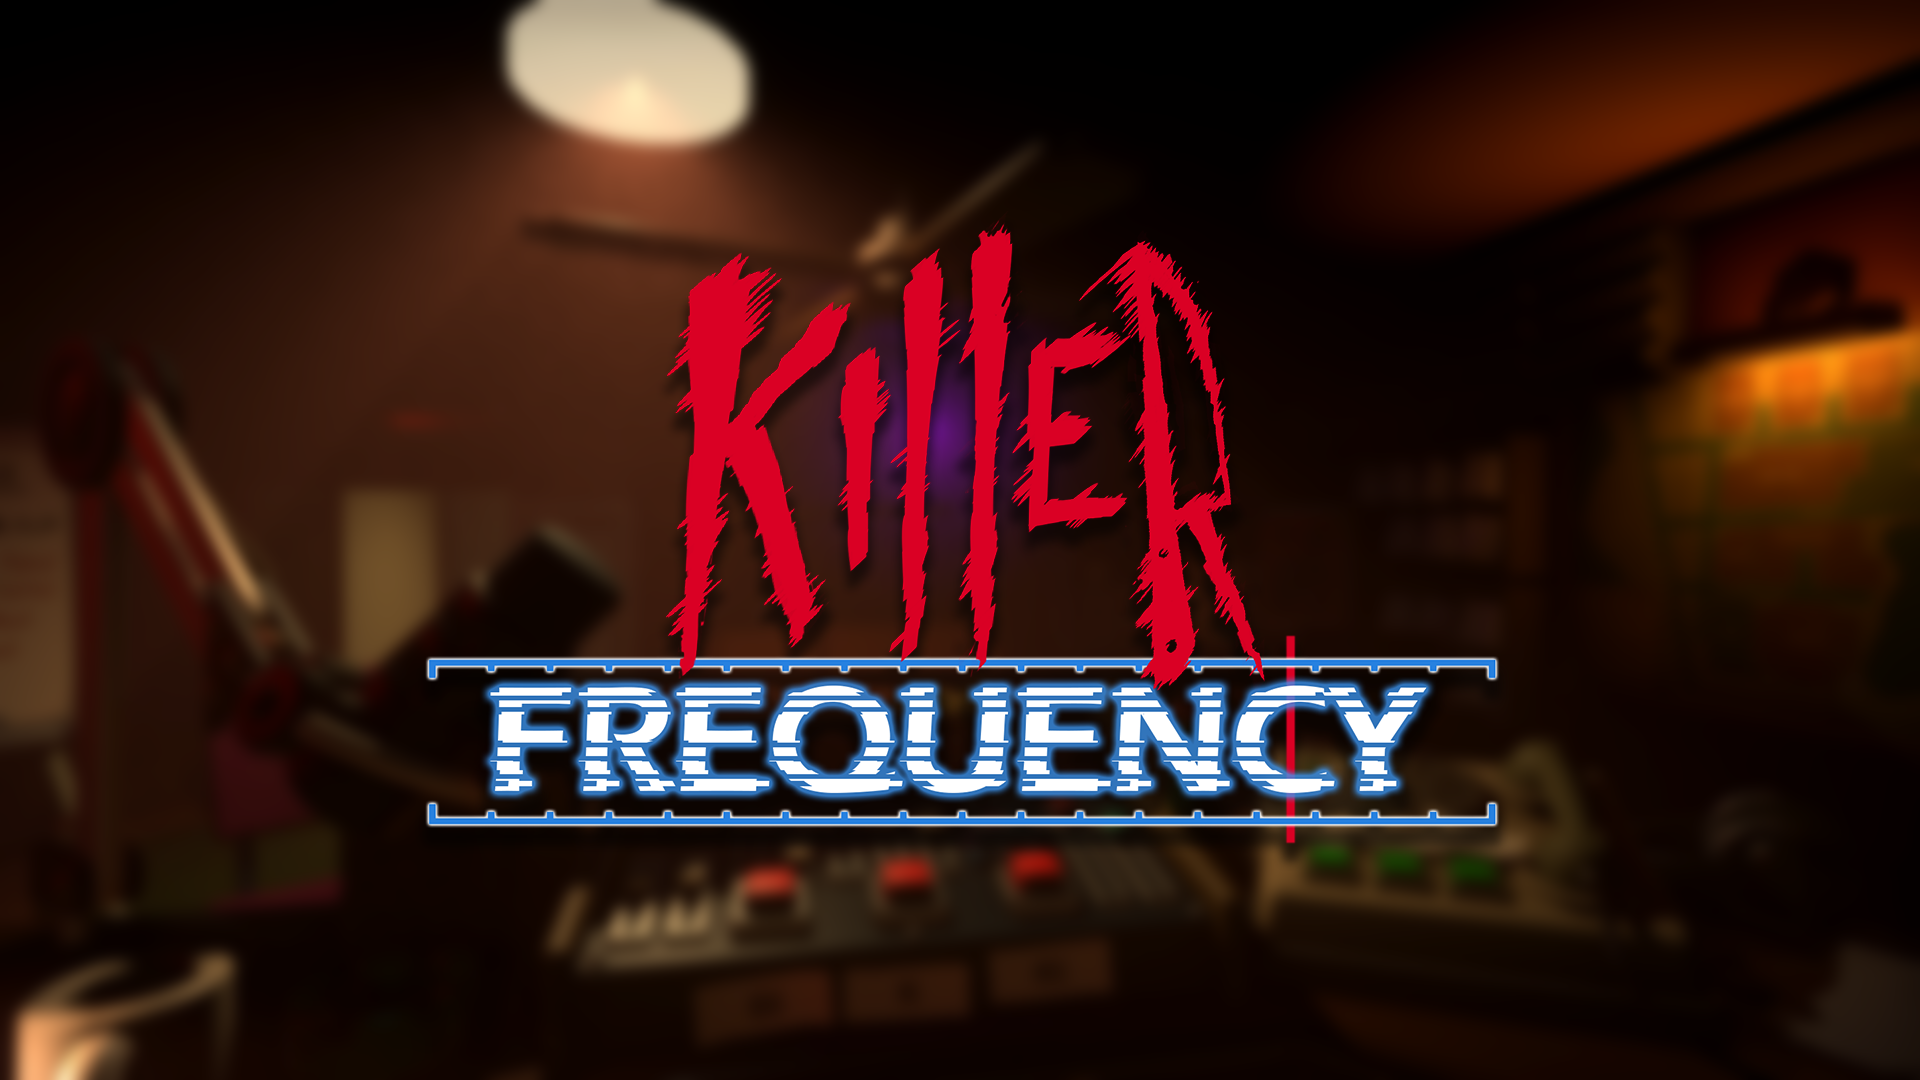 Killer frequency